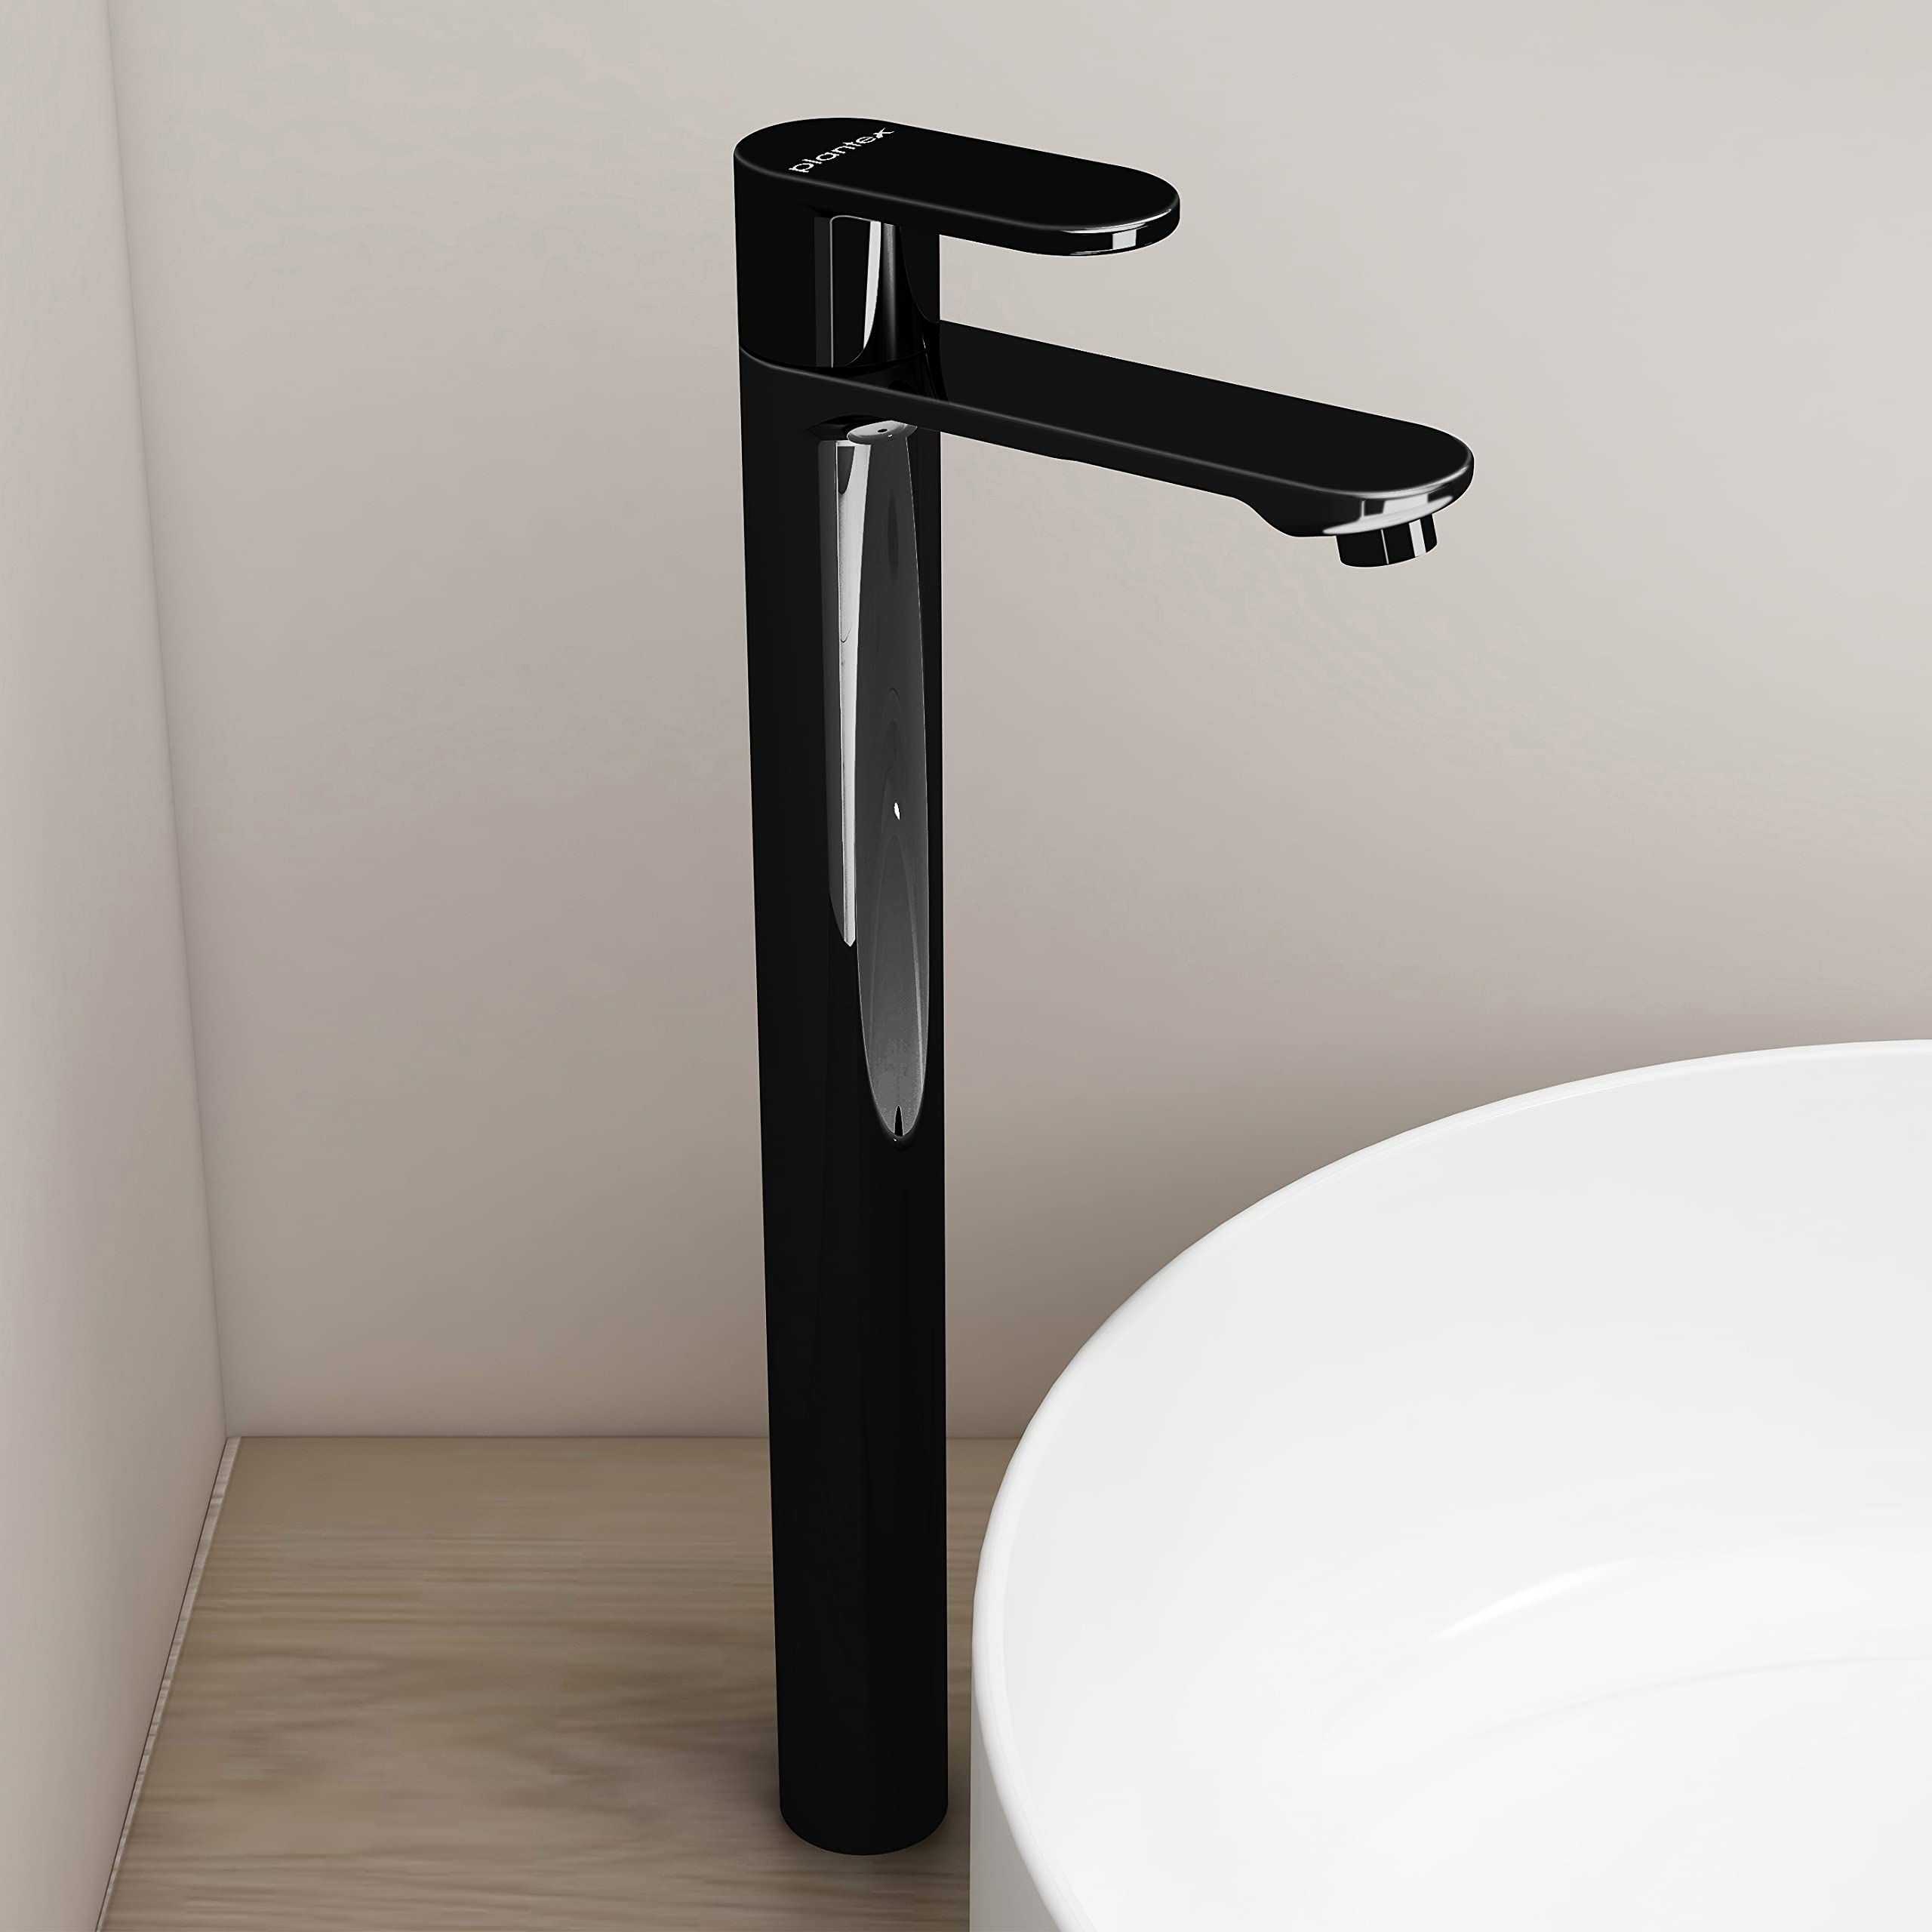 Plantex Pure Brass ORN-204 Single Lever High Neck Pillar Cocktail Tap for Wash Basin/Kitchen Sink Faucet with Teflon Tape (Black Glossy Finish)